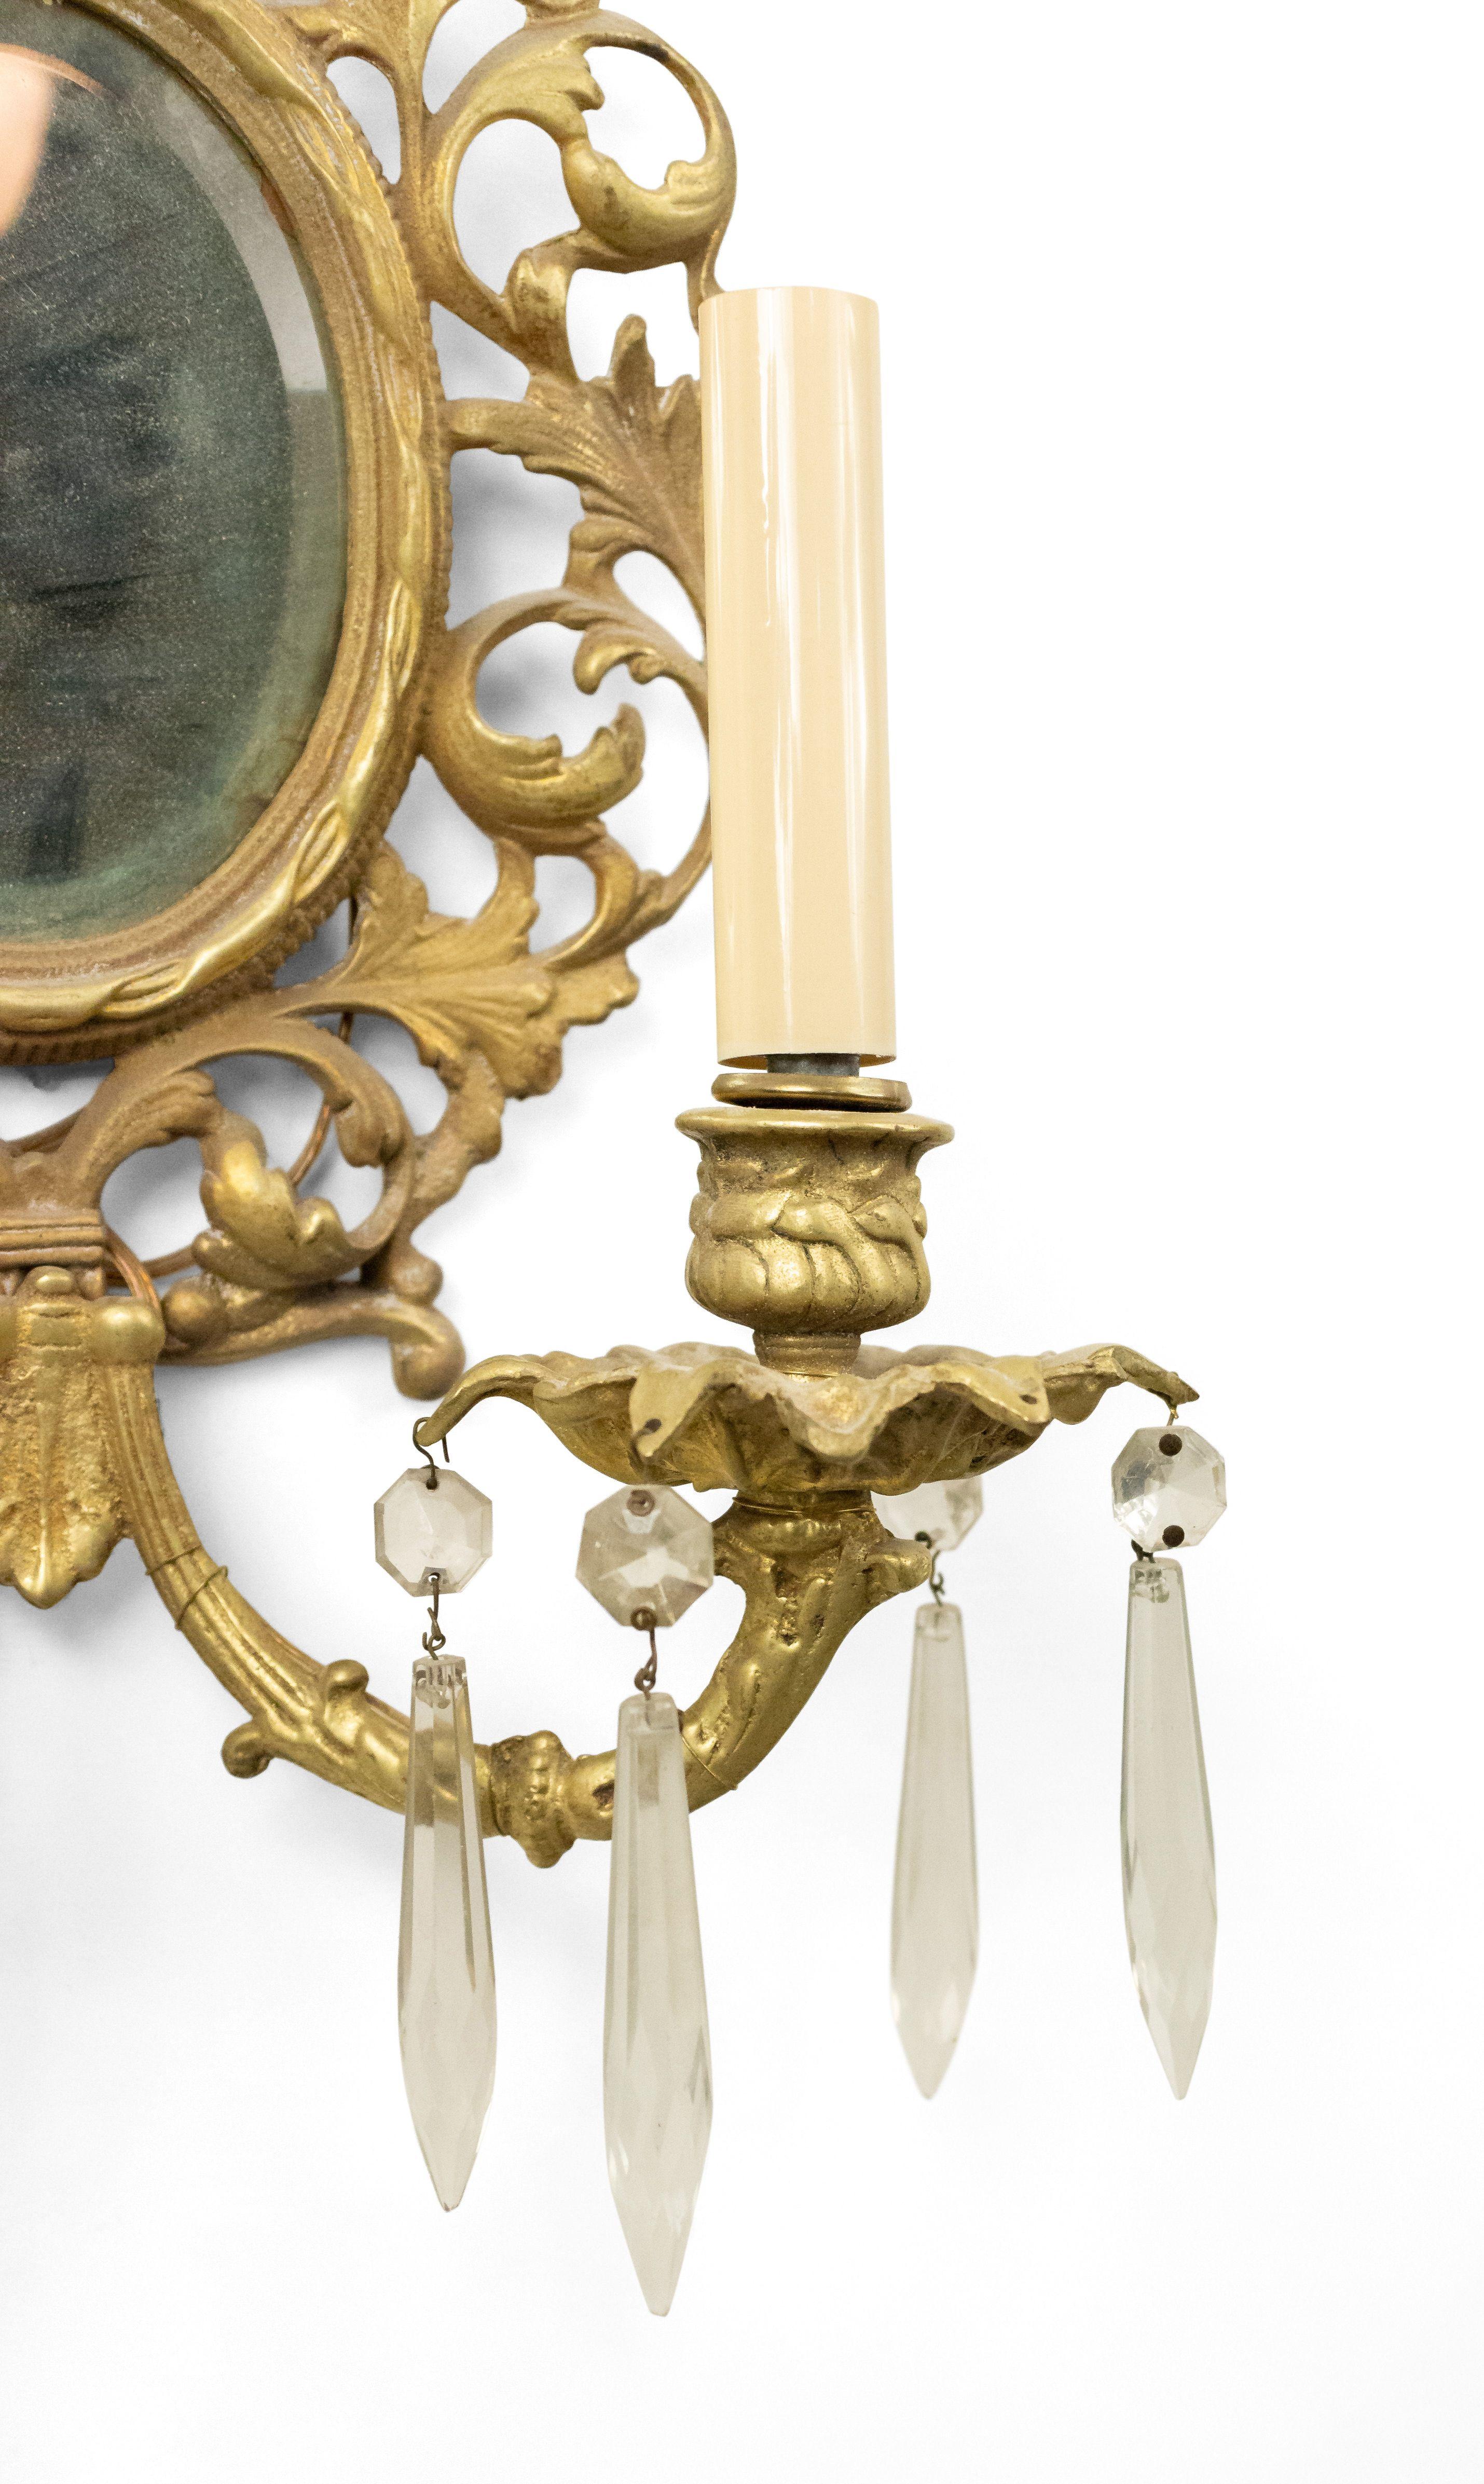 French Victorian 20th century 2 light sconce in gilt bronze with scrolling foliate arms emanating from a filigree oval back with a beveled mirror insert (marked Glo-Mar Artworks, NY).